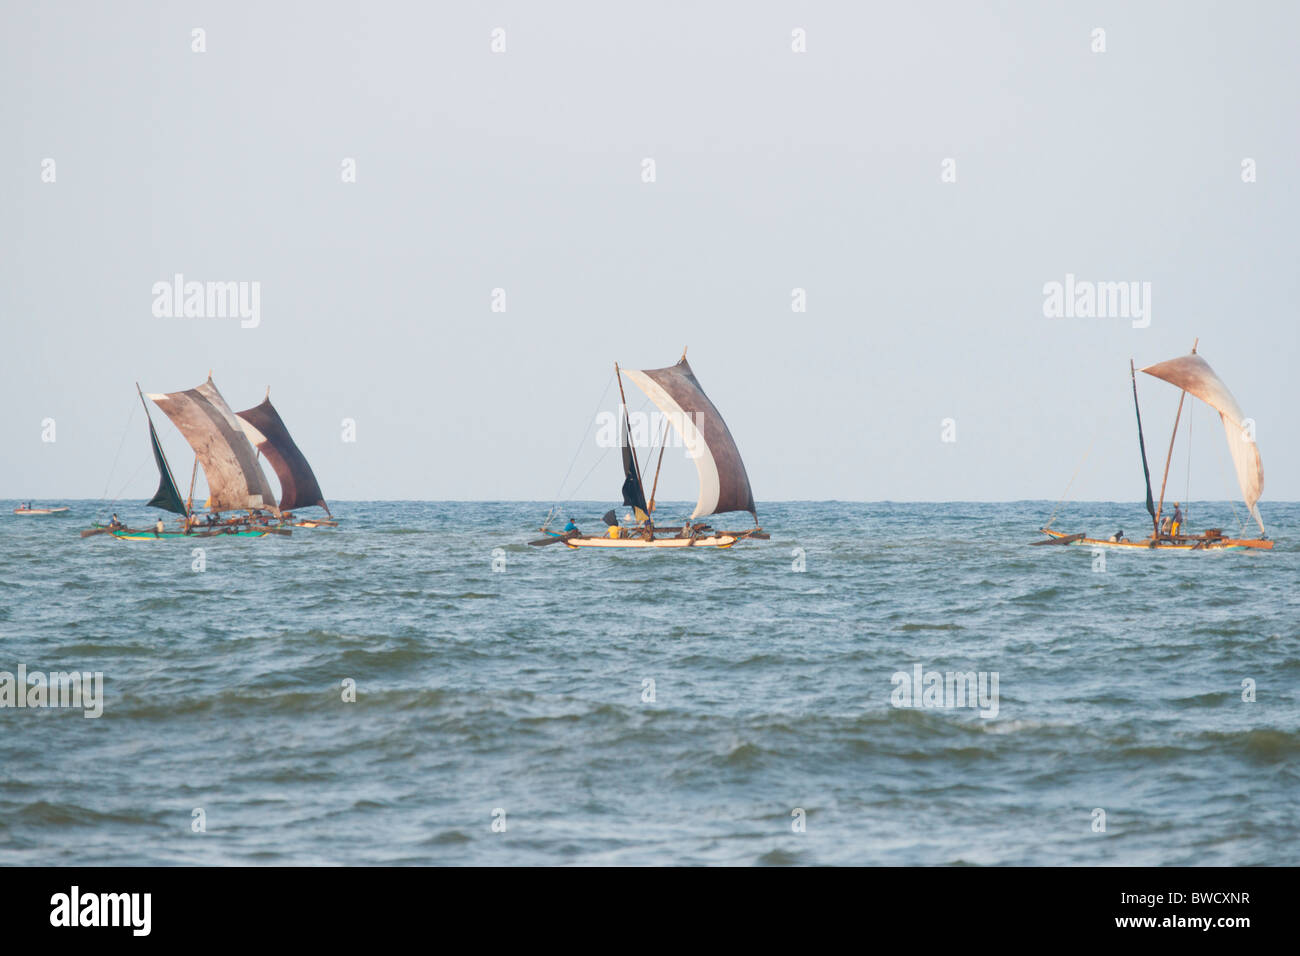 Traditional fishing vessels sailing on the Indian Ocean, Sri lanka Stock Photo